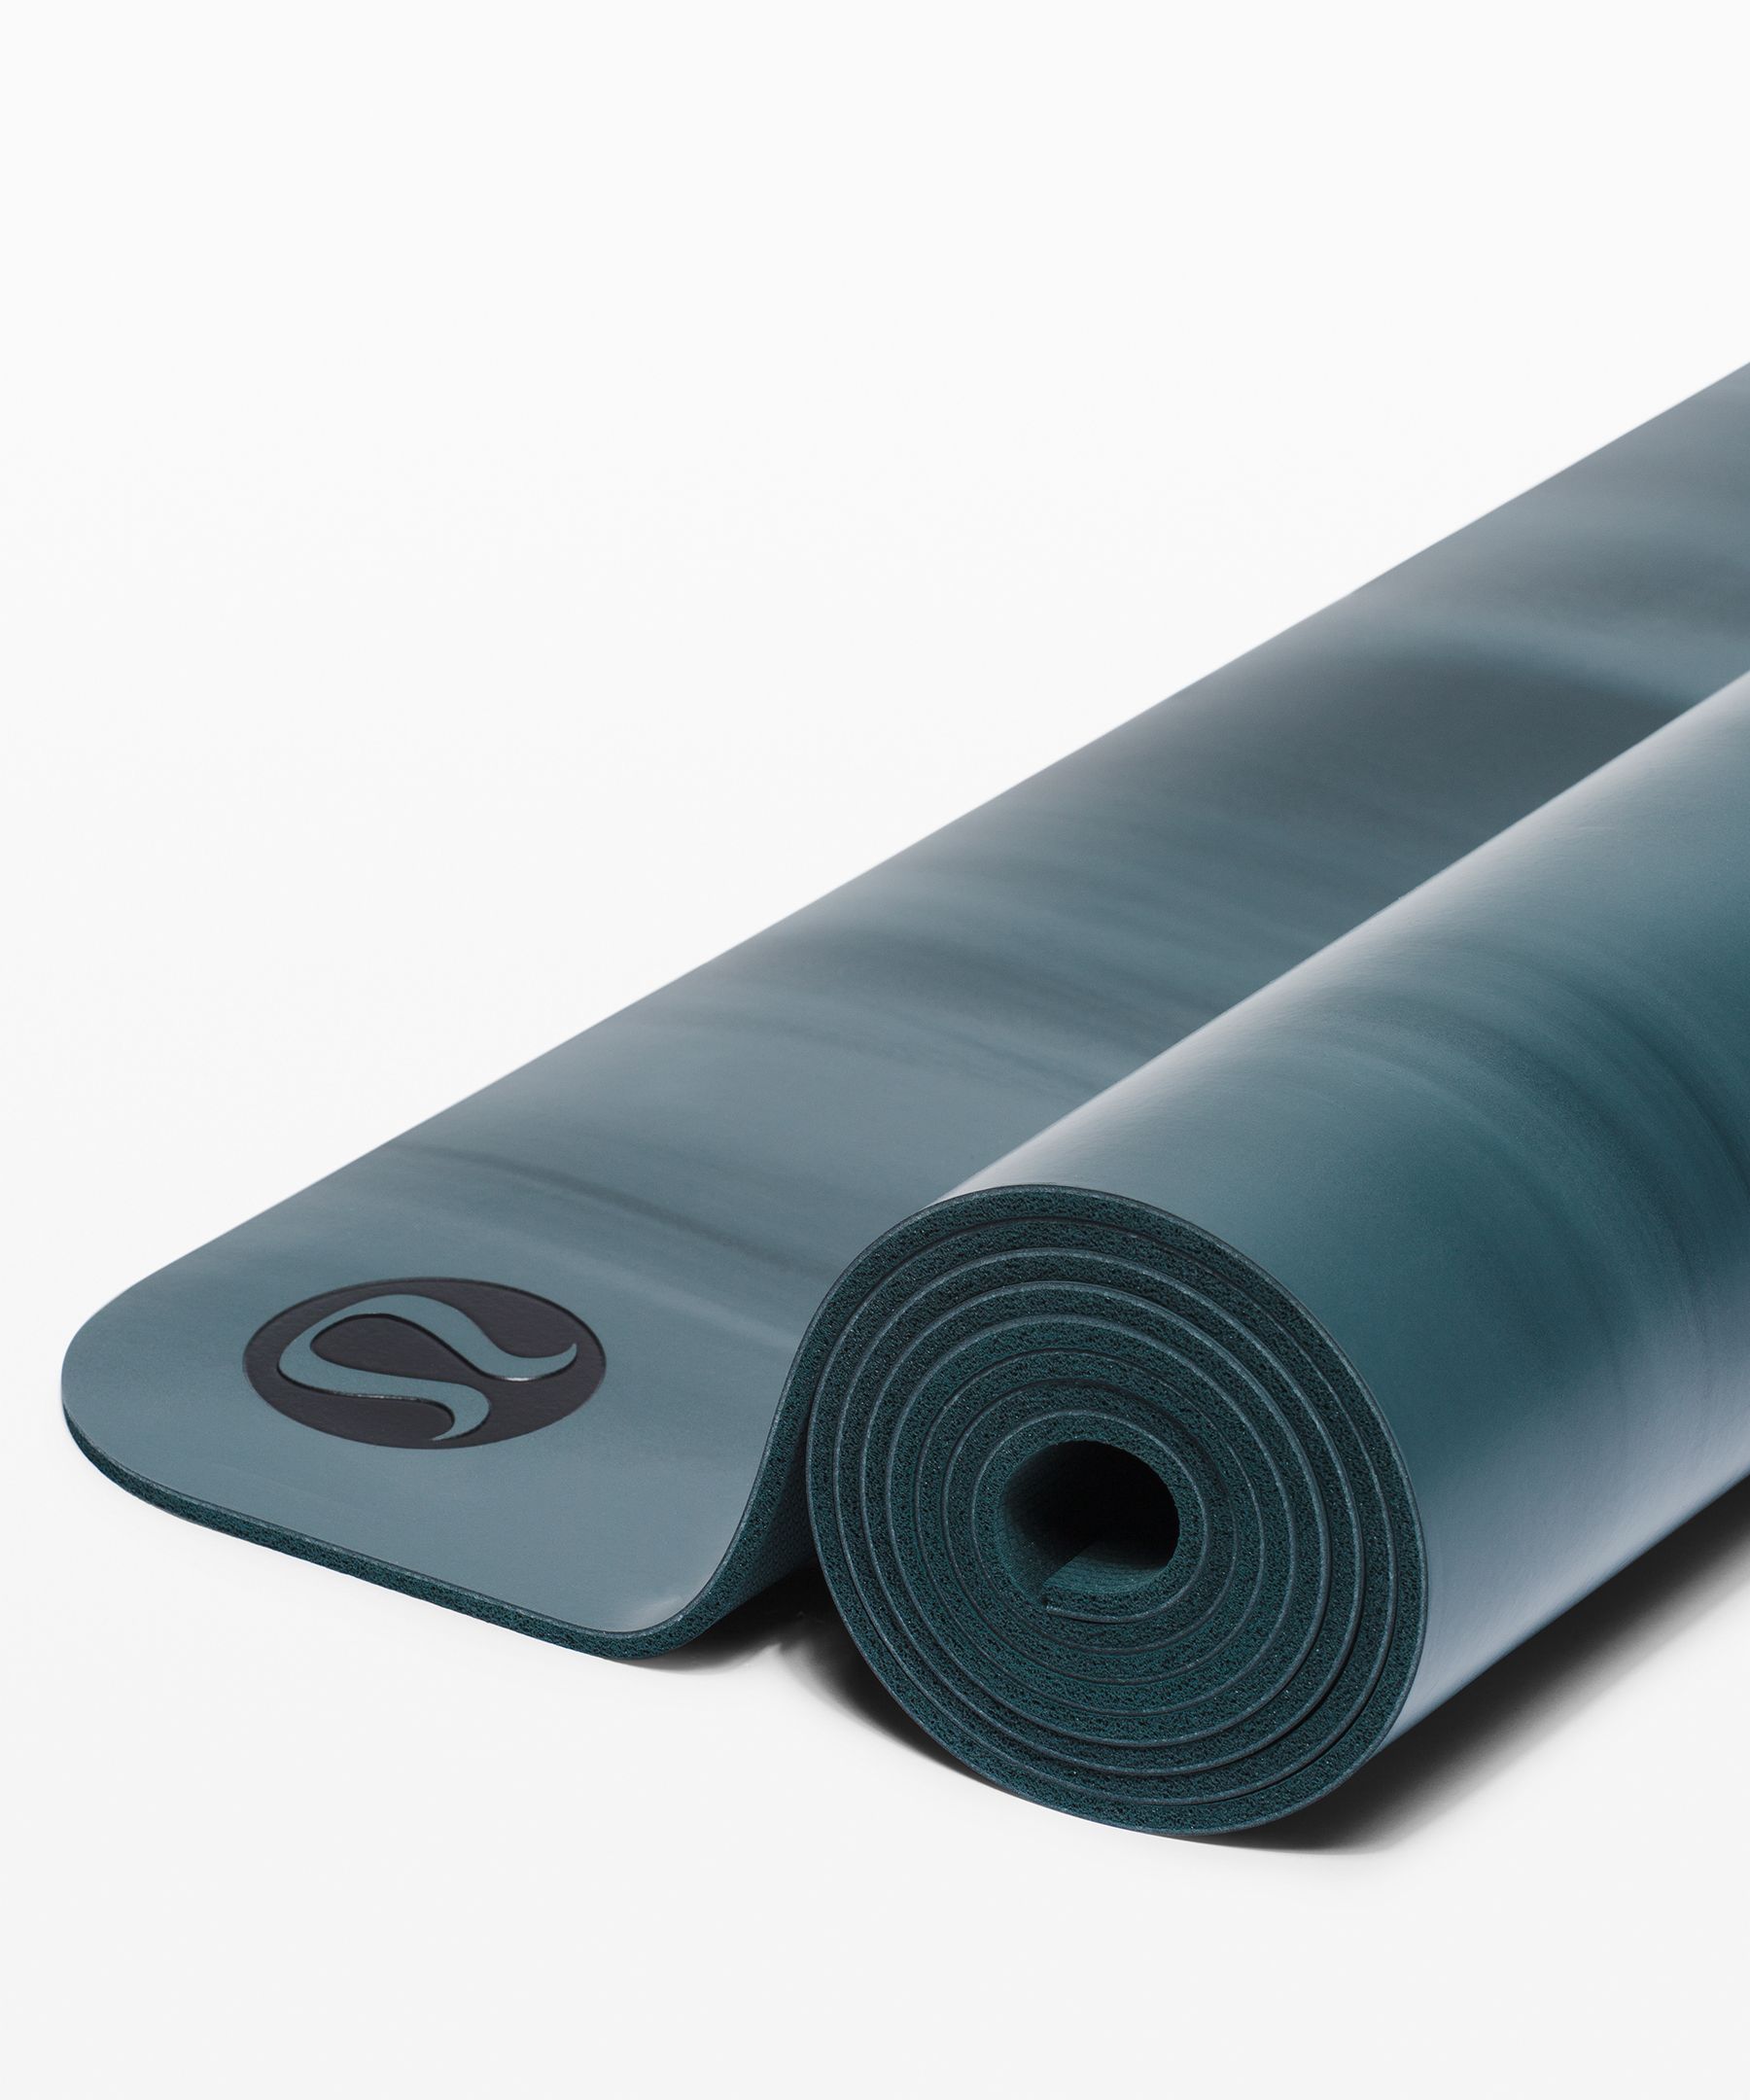 Lululemon Big Mat Review  International Society of Precision Agriculture